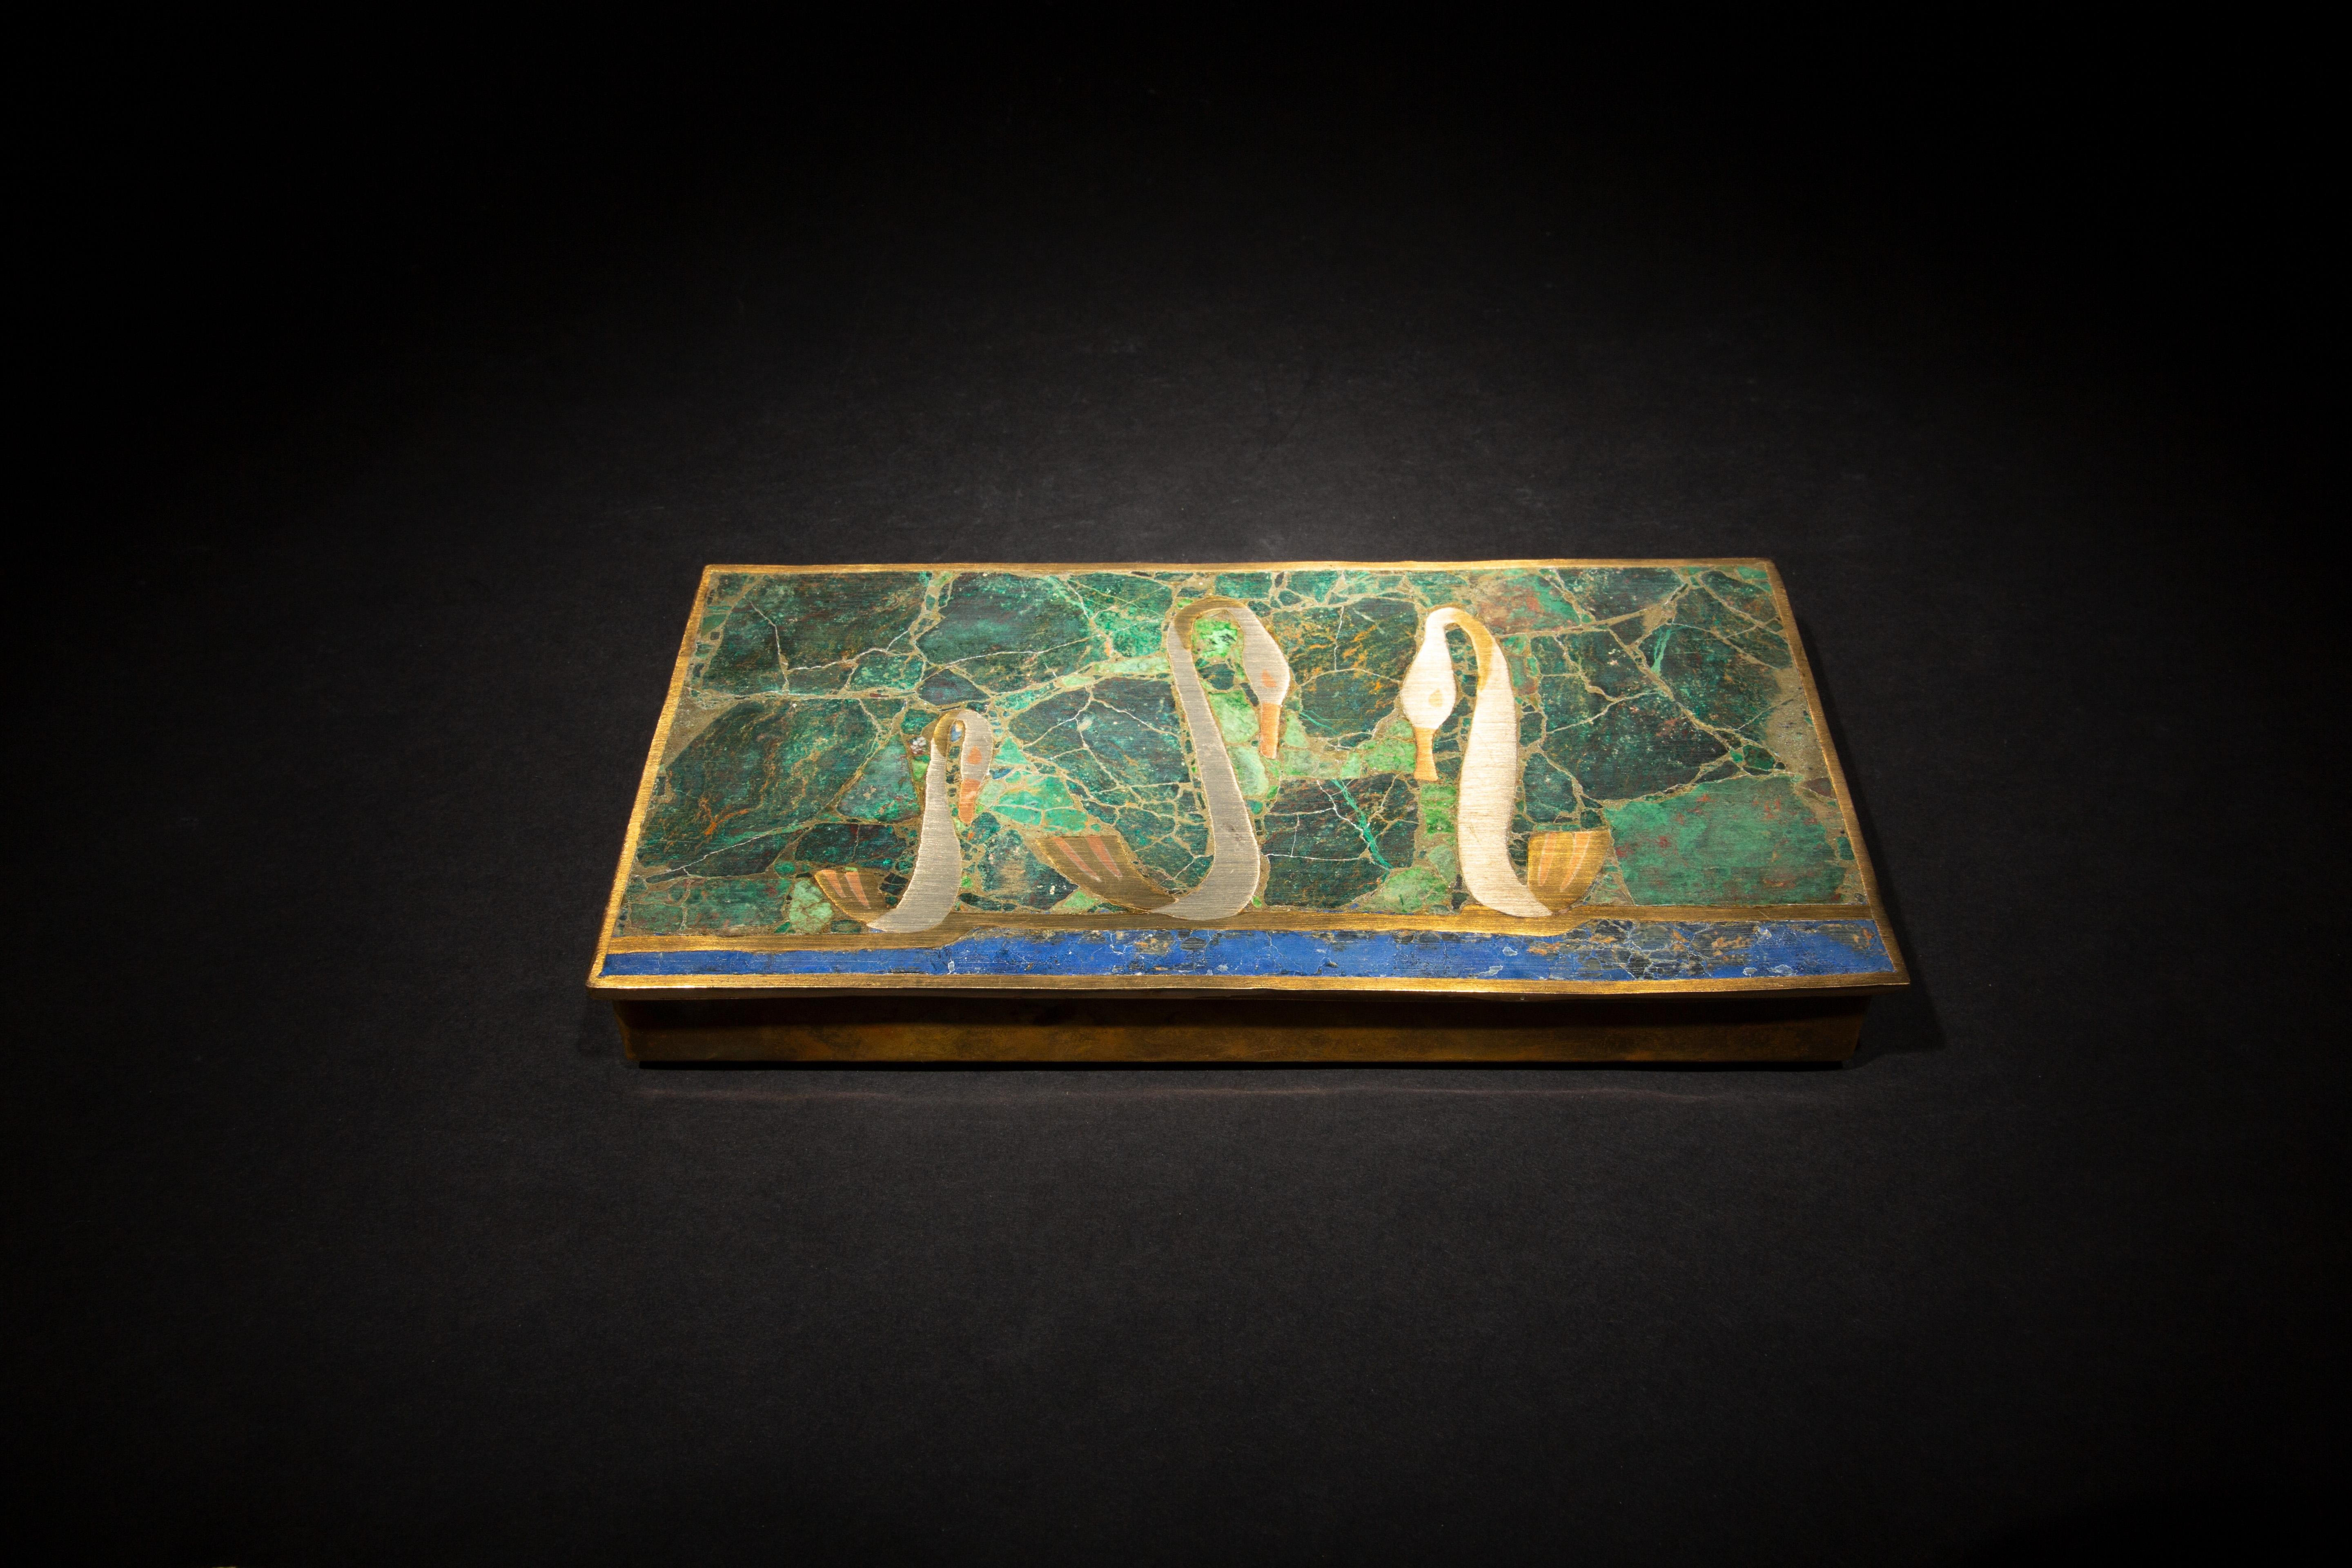 This mid-century inlaid box is a masterpiece of design and craftsmanship, featuring an exquisite blend of malachite, chrysocolla, and lapis lazuli. The vibrant green of the malachite, serene blue of the lapis, and the subtle shades of chrysocolla